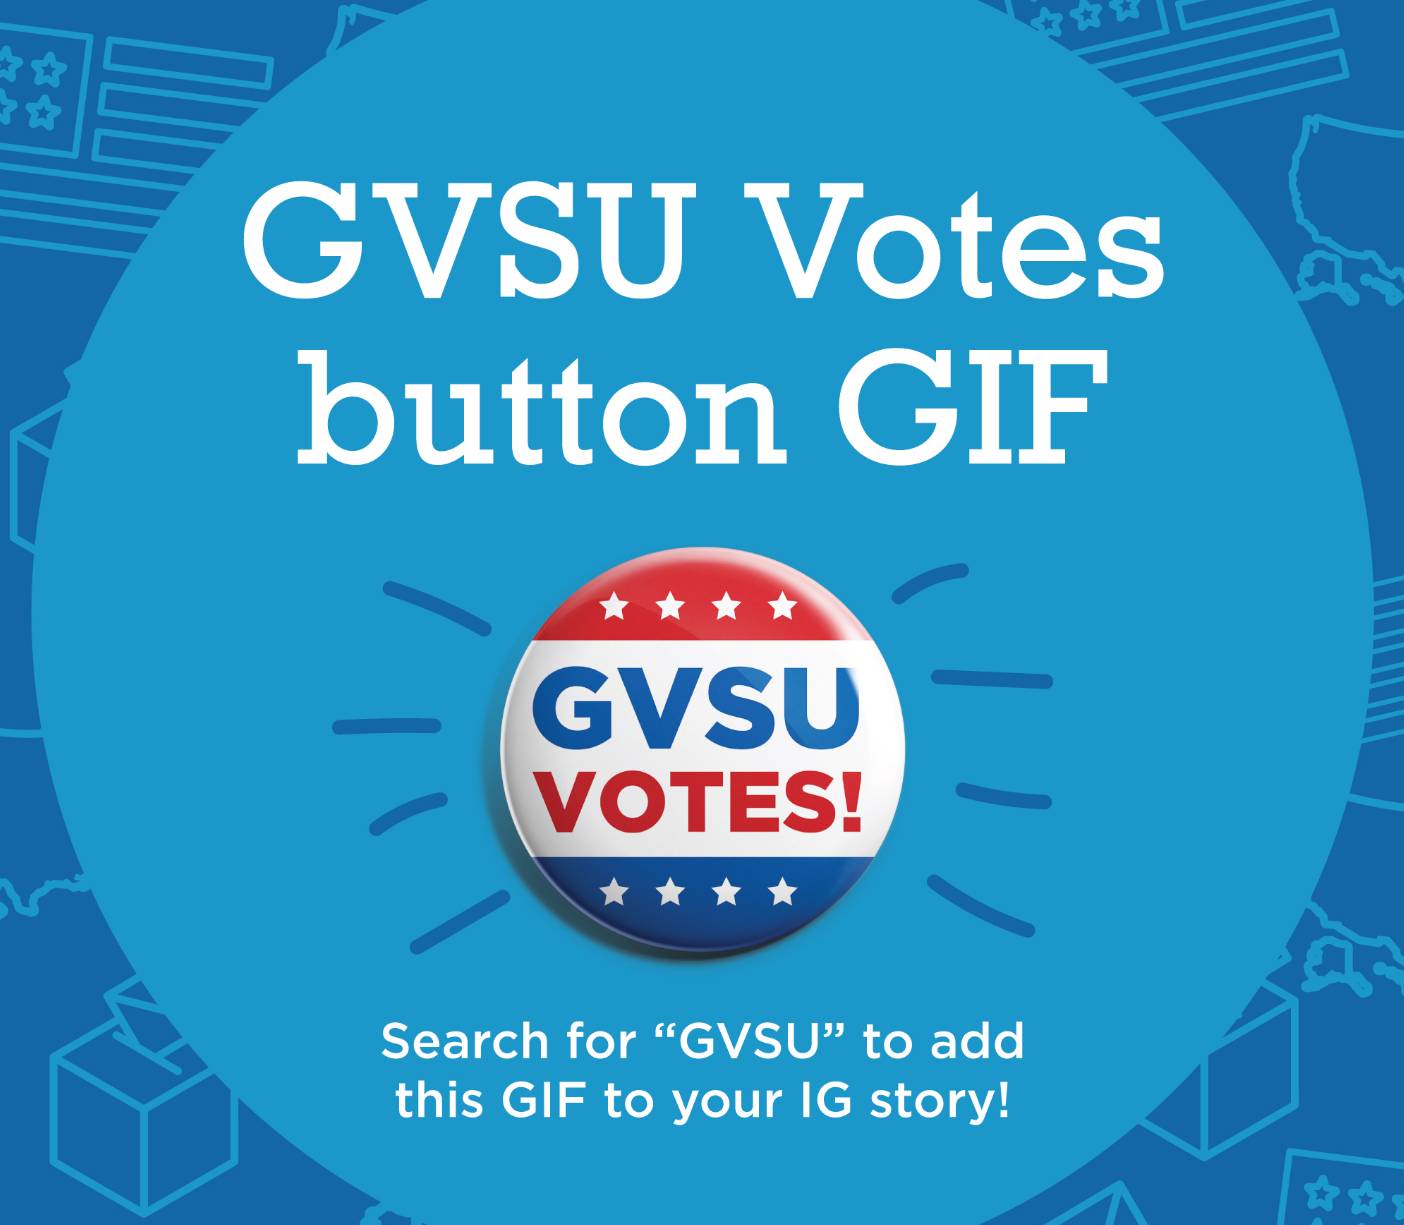 GVSU Votes button GIF - search for "GVSU" to add this GIF to your IG story!